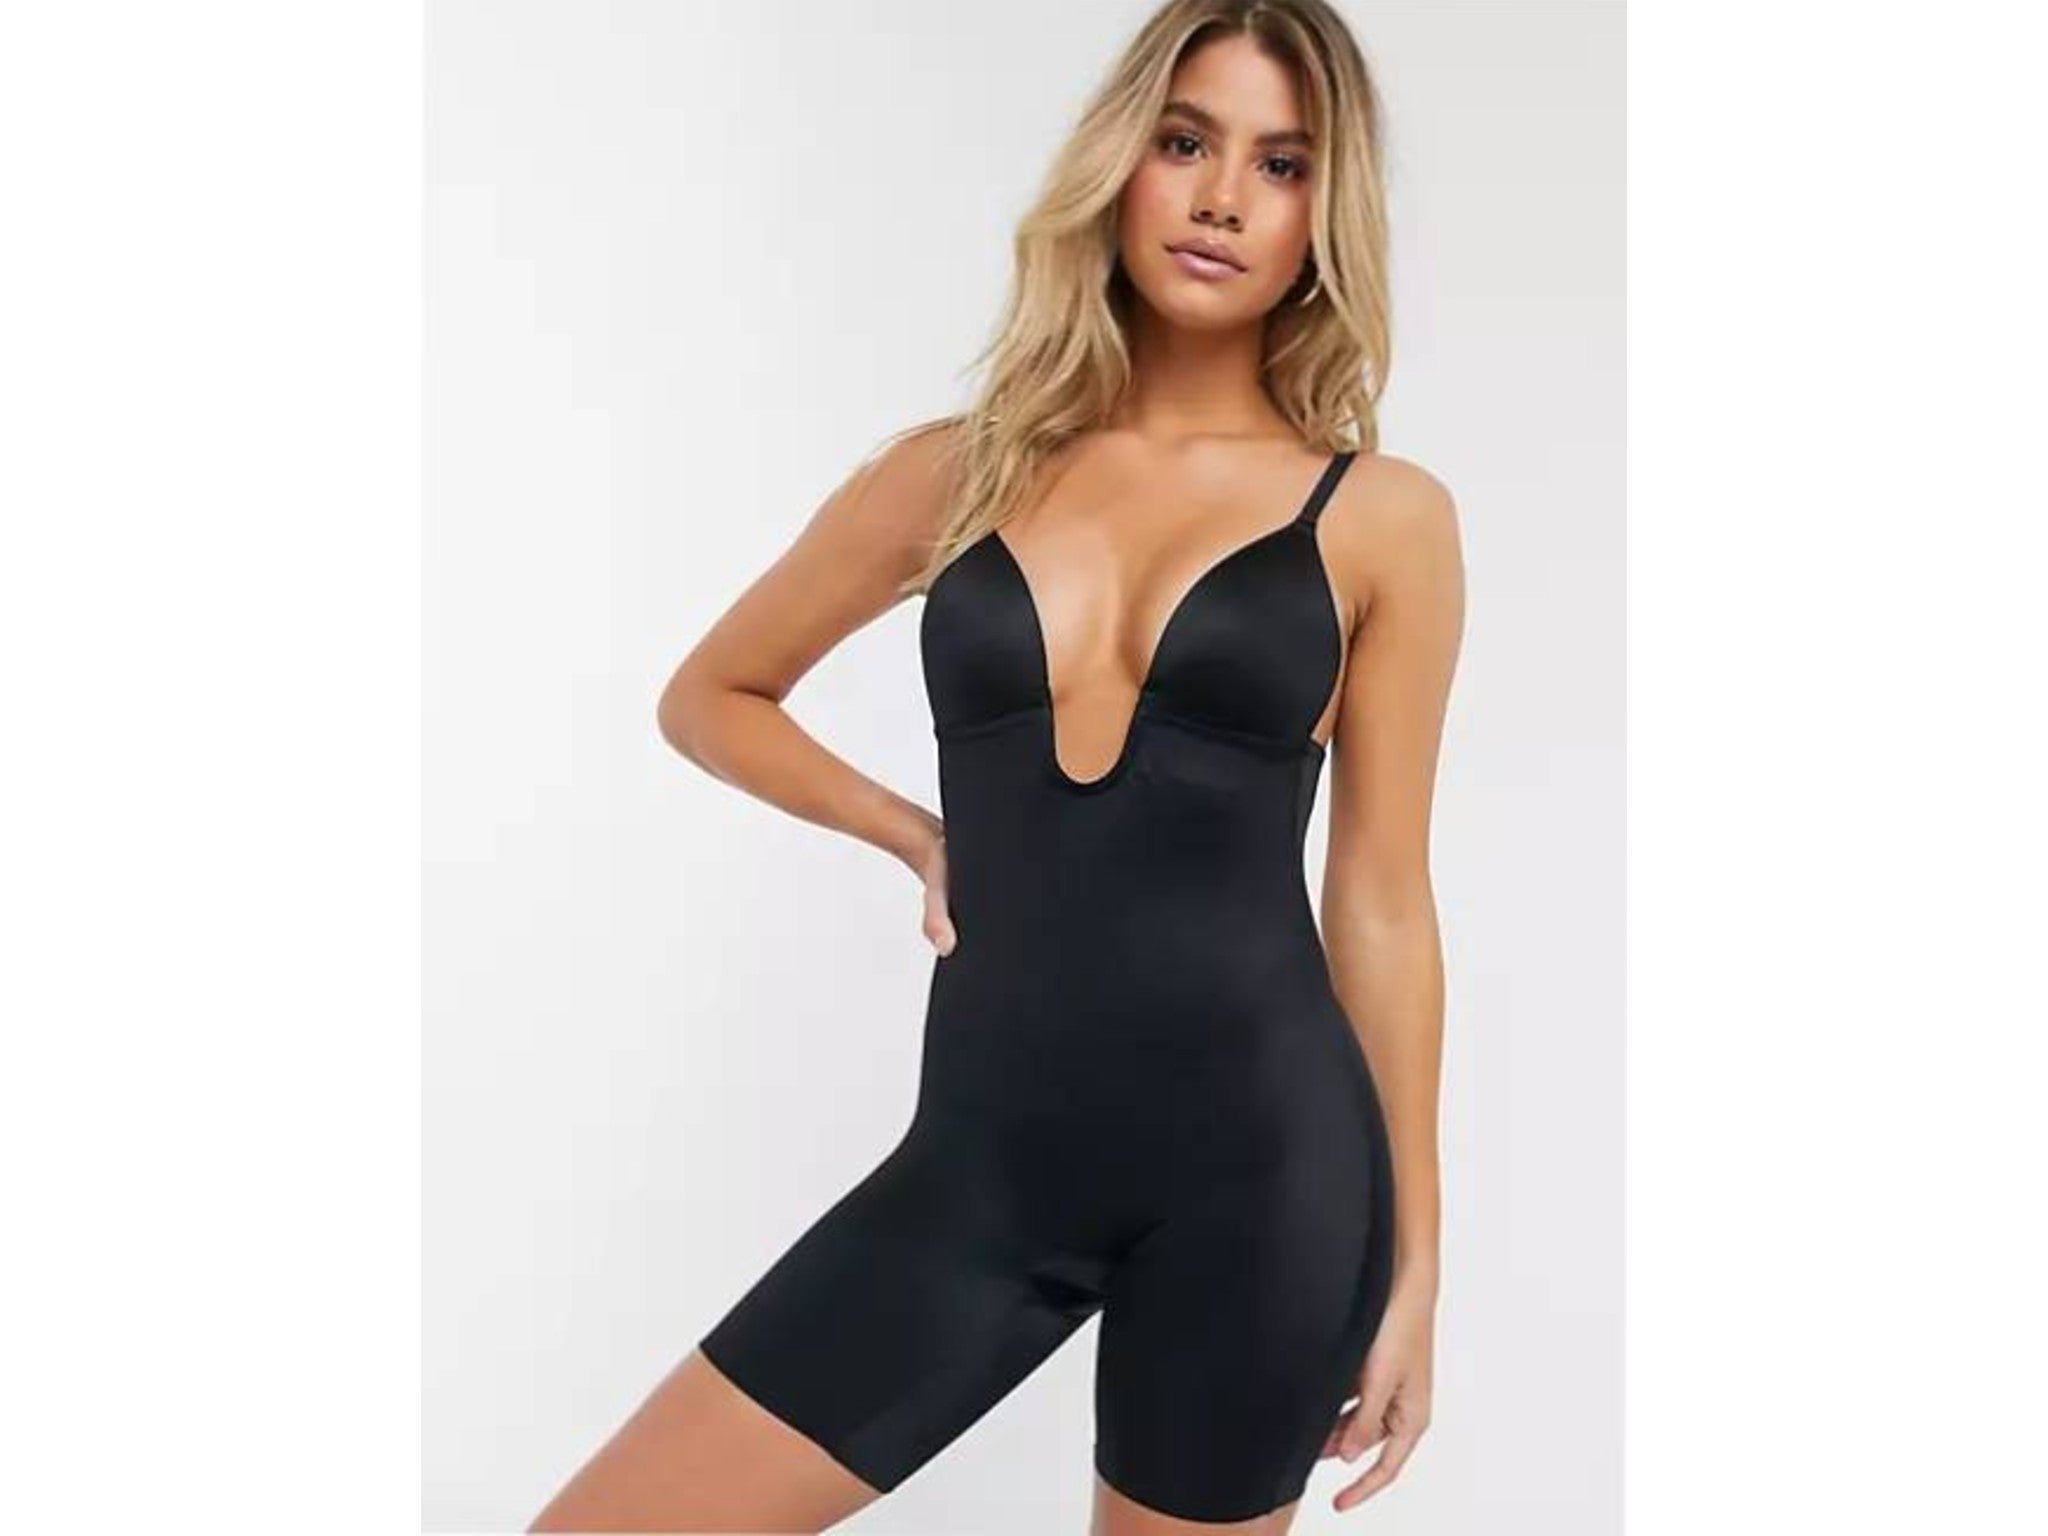 https://static.independent.co.uk/2021/08/09/12/Spanx%20suit%20your%20fancy%20low%20back%20mid-thigh%20smoothing%20bodysuit%20indybest.jpeg